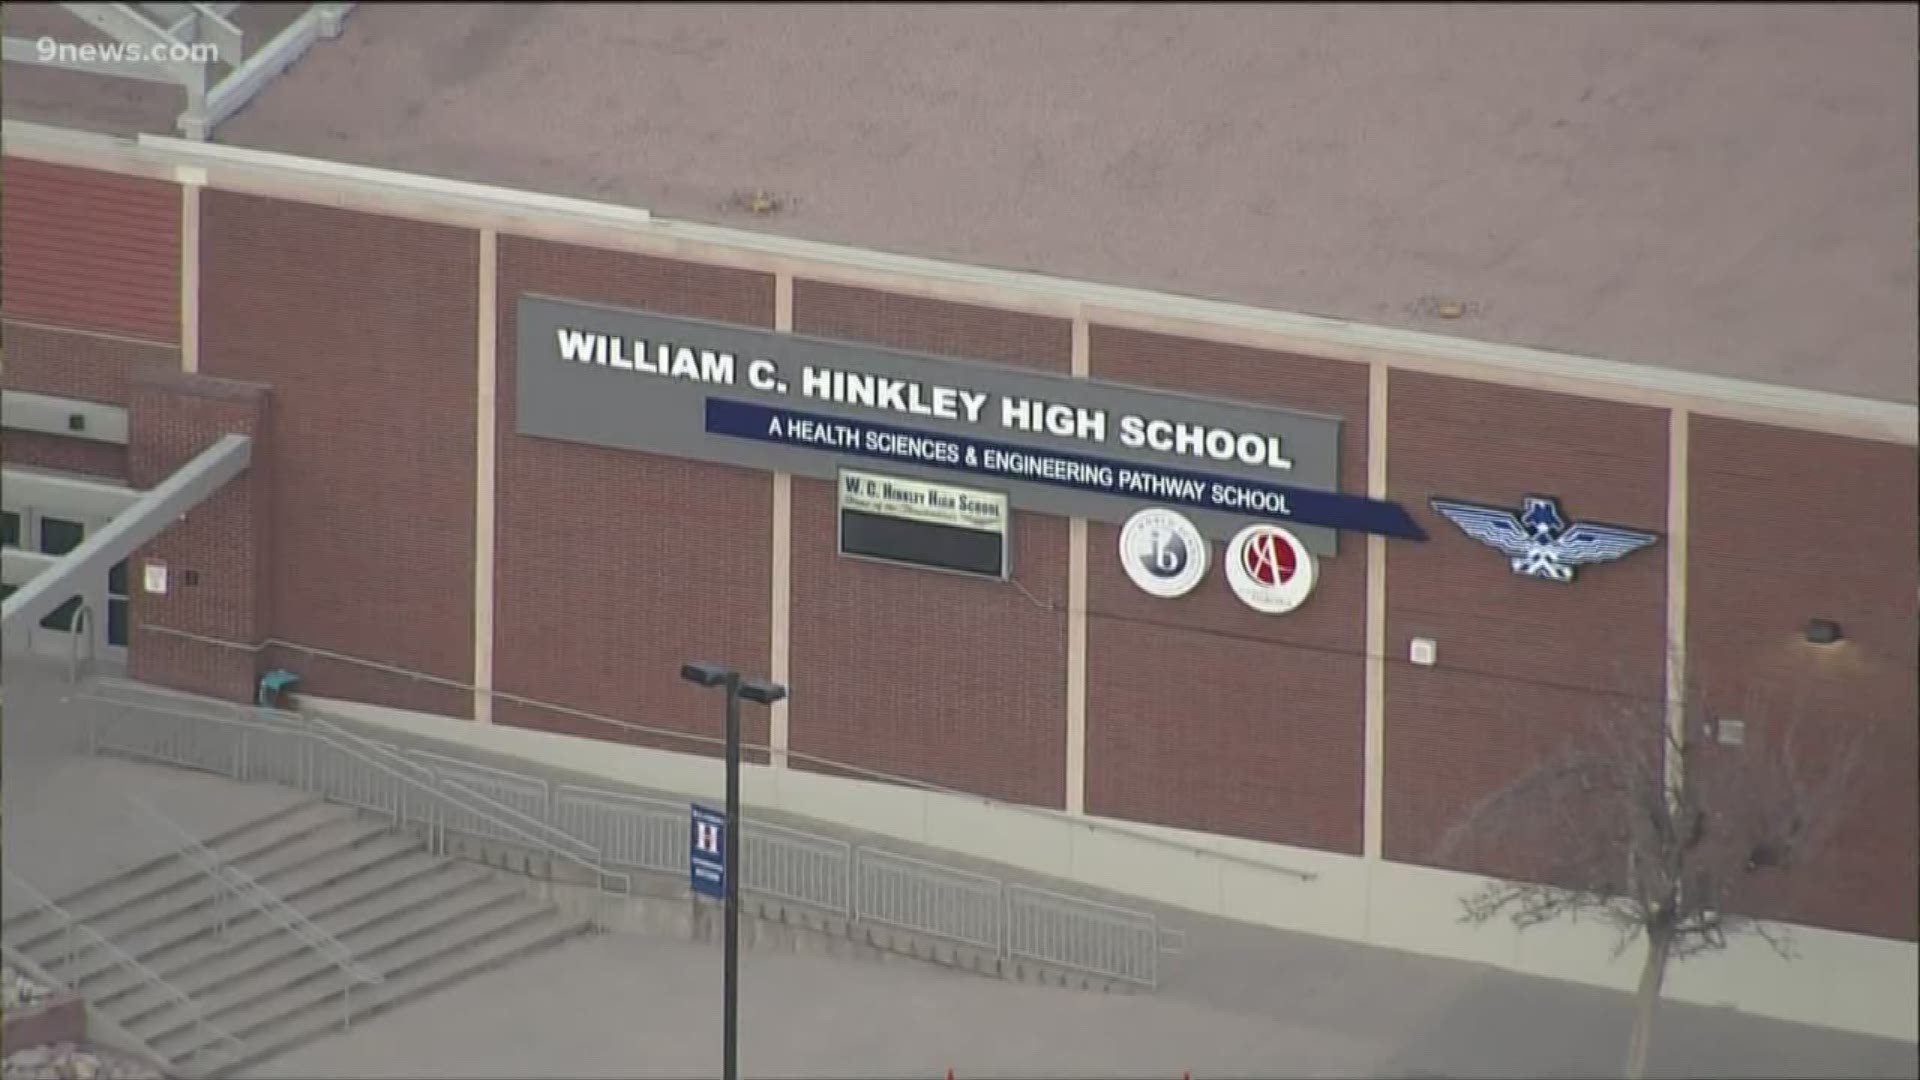 The 15-year-old student was found in a classroom with a loaded gun.